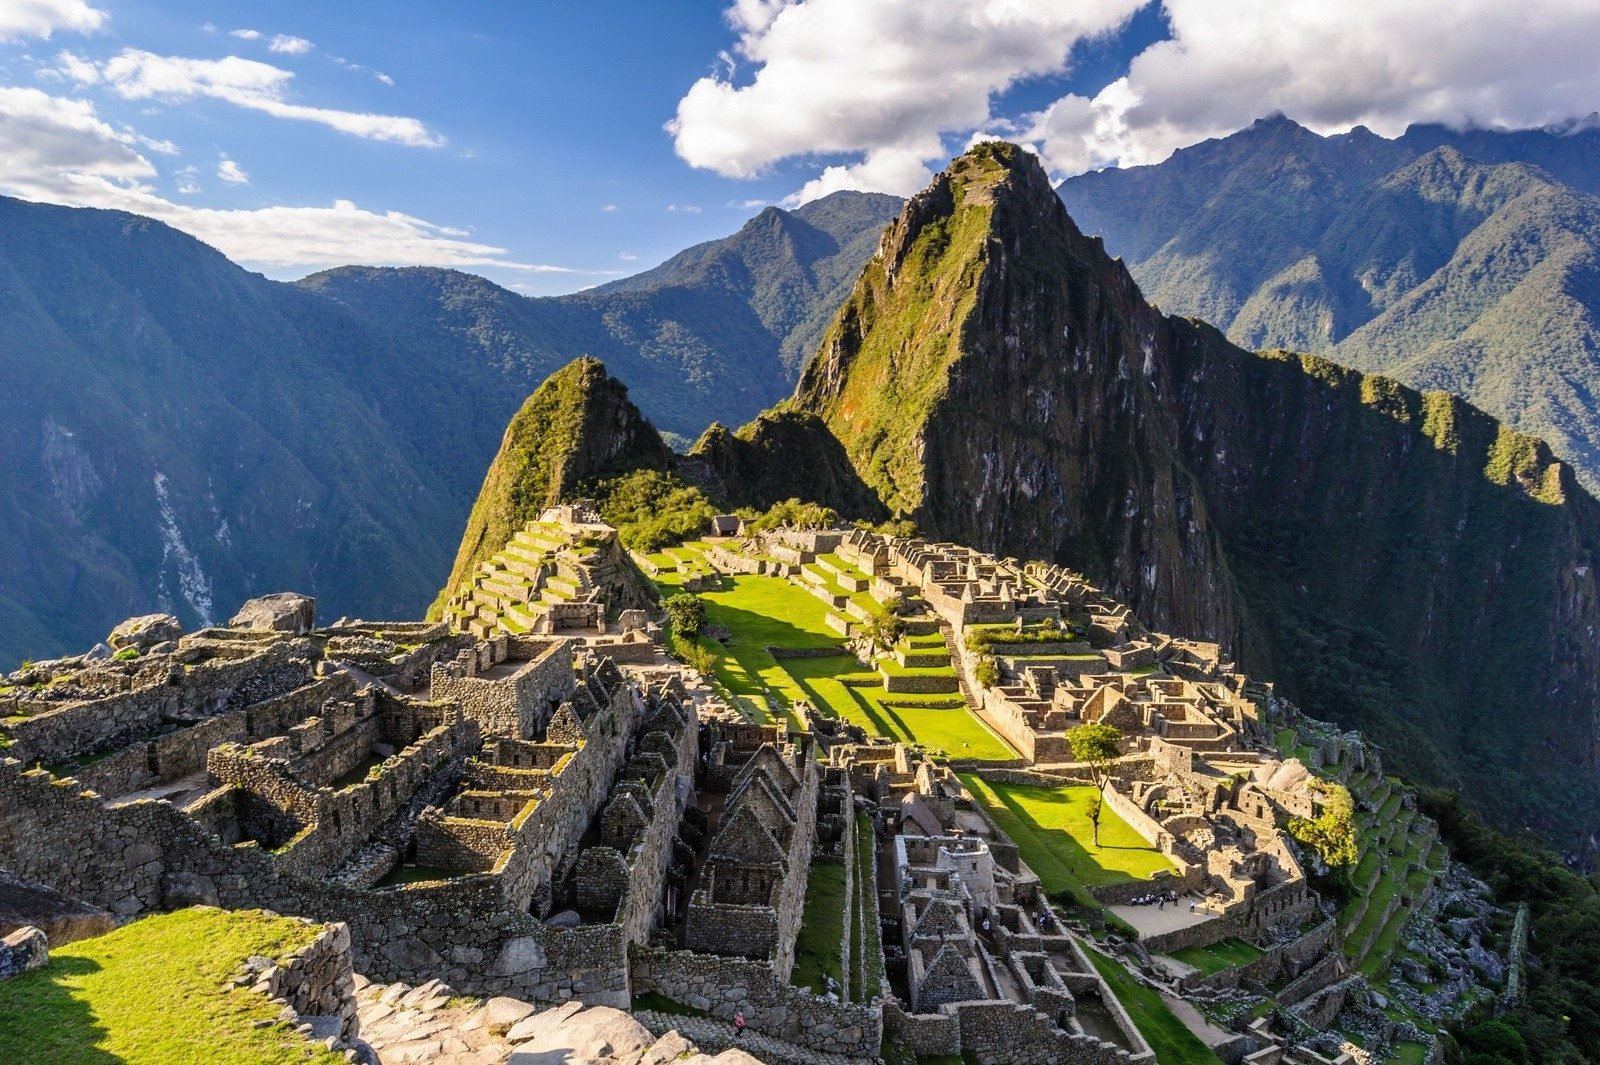 A view of Machu Picchu in Peru, surrounded by mountains.